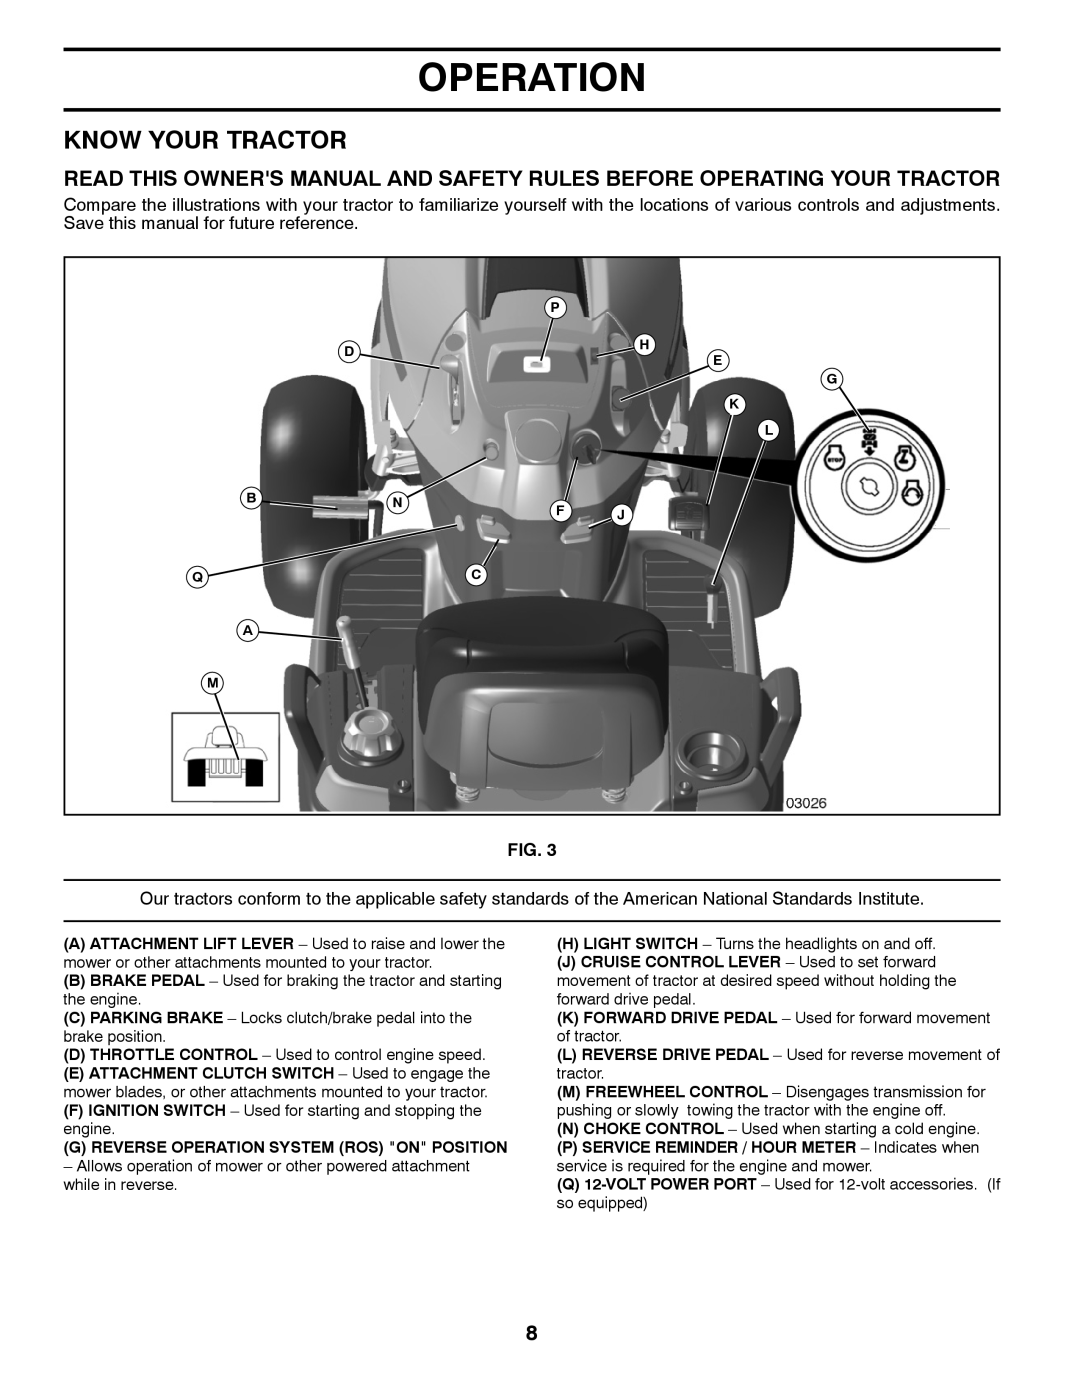 Husqvarna YTH2146XP owner manual Know Your Tractor, G Reverse Operation System Ros On Position 